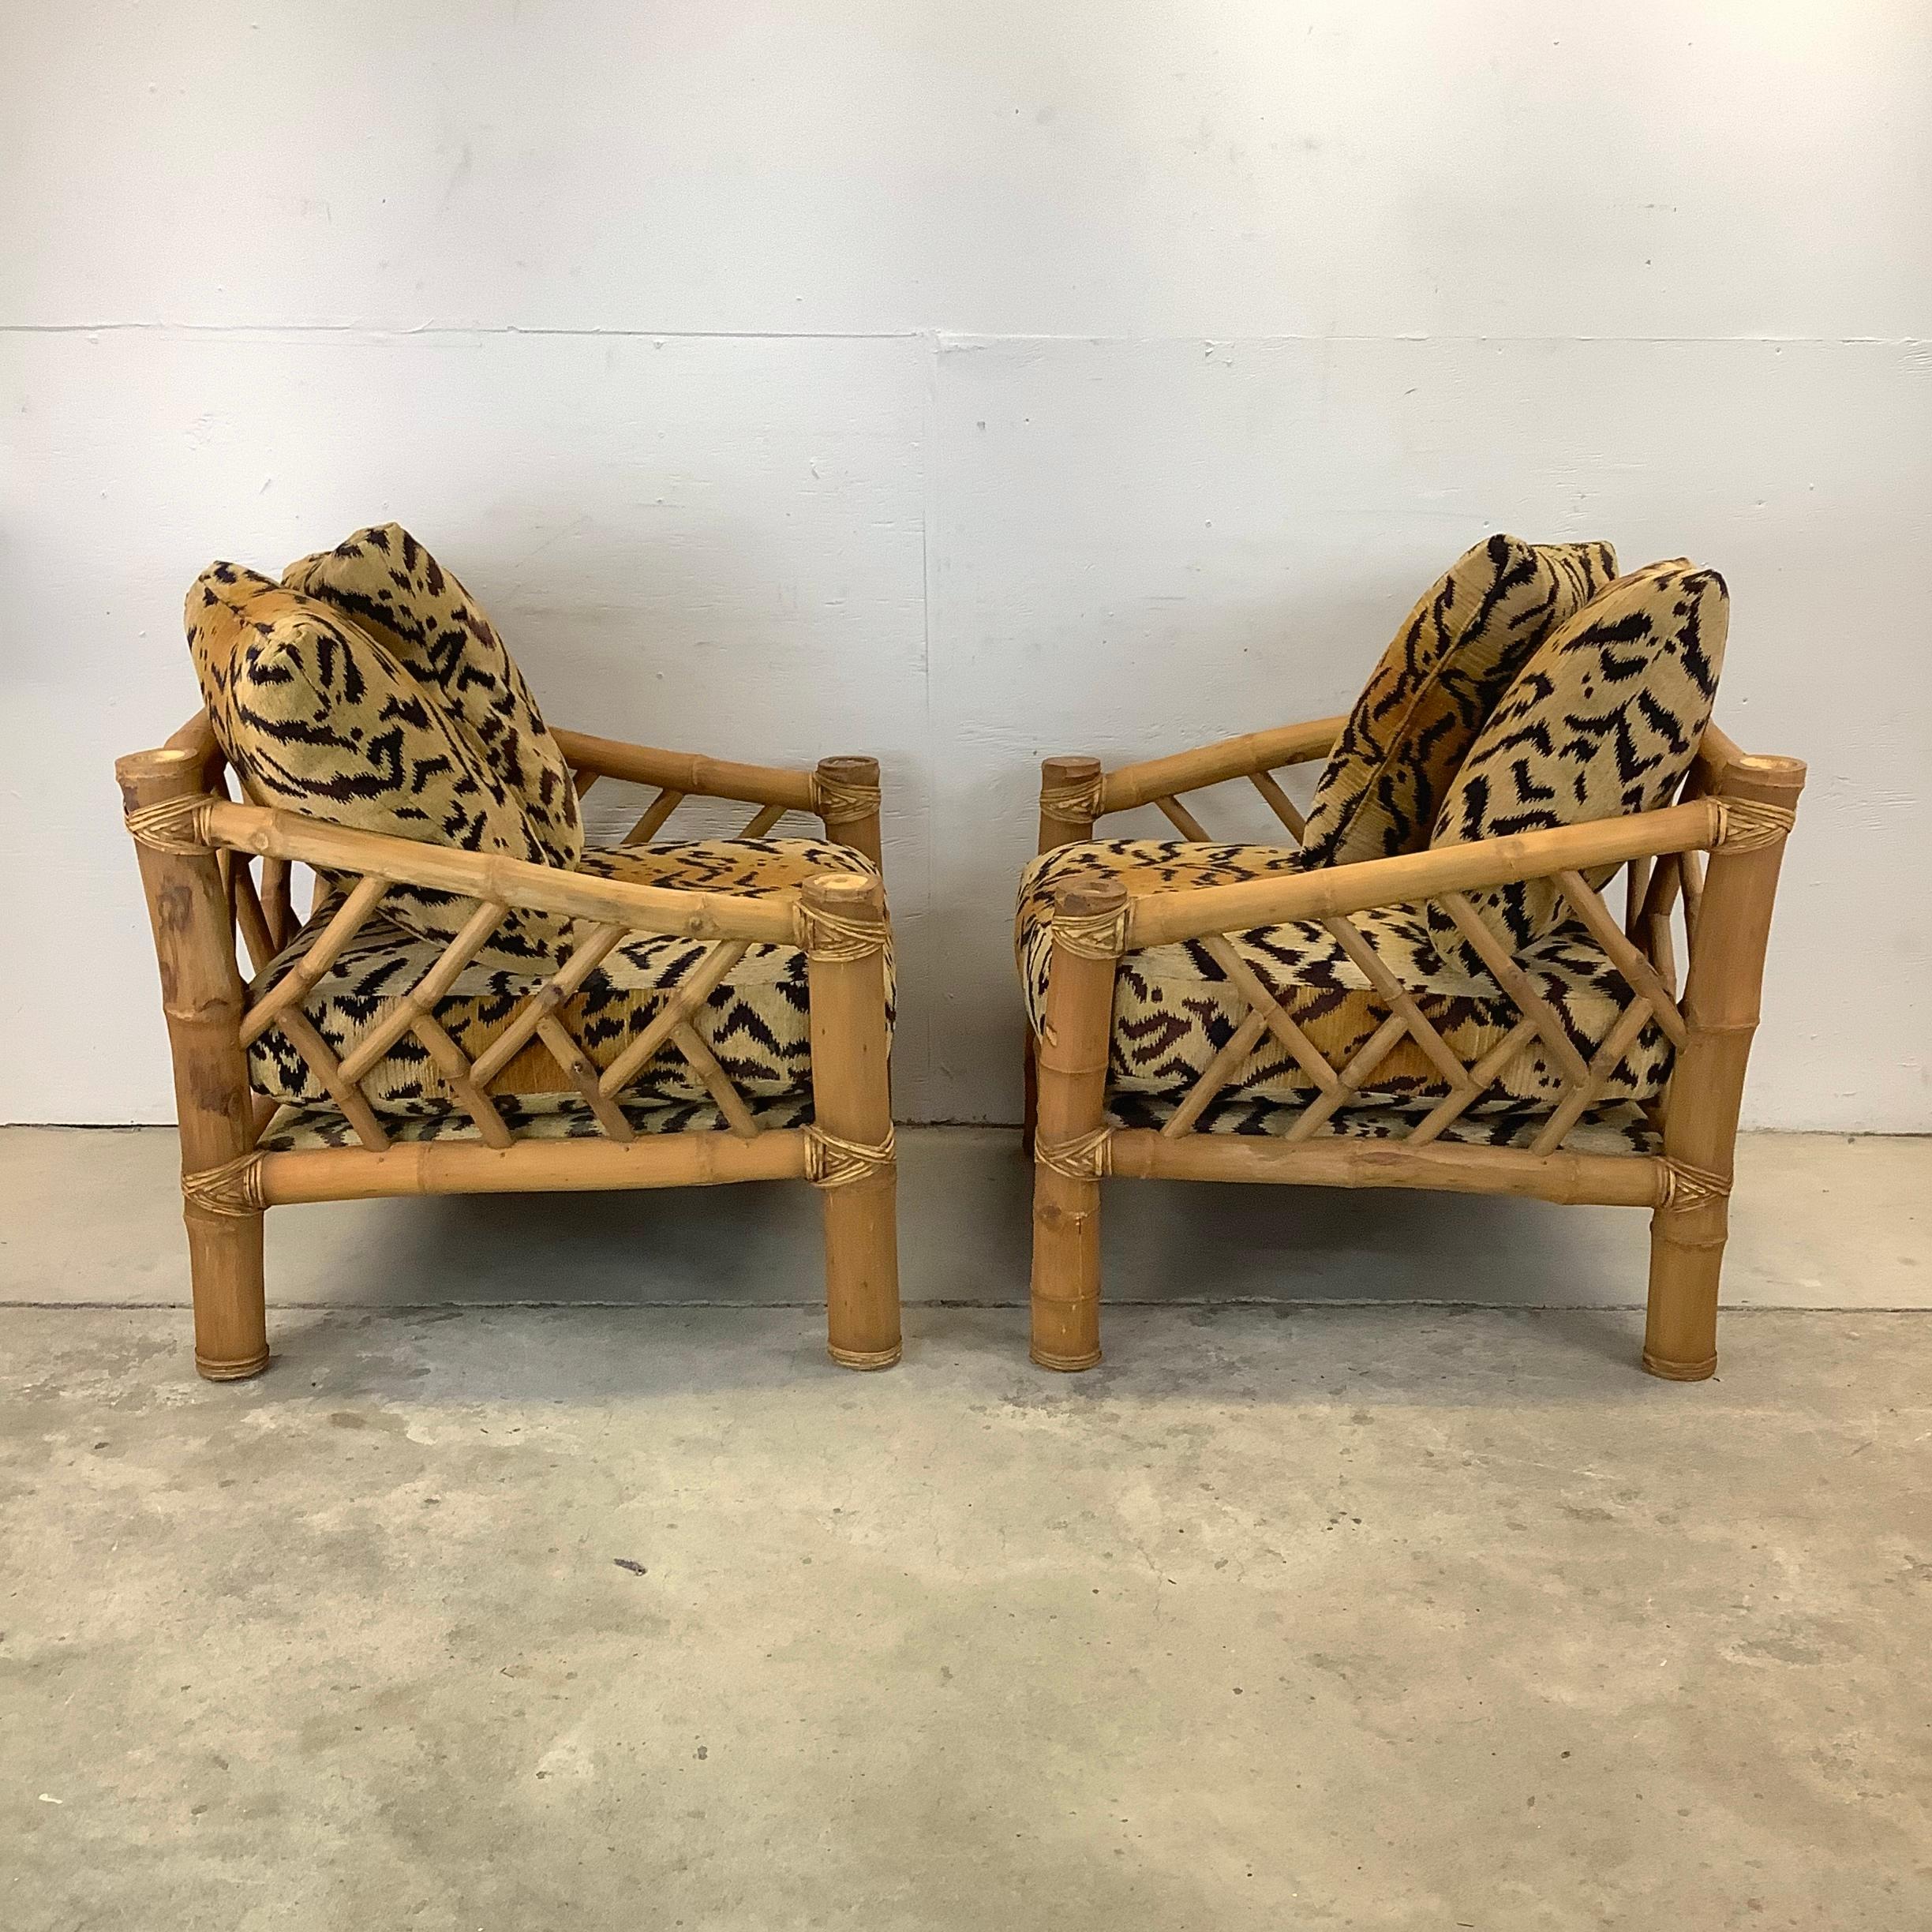 Upholstery Pair Vintage Bamboo Armchairs & Ottoman in Tiger Print